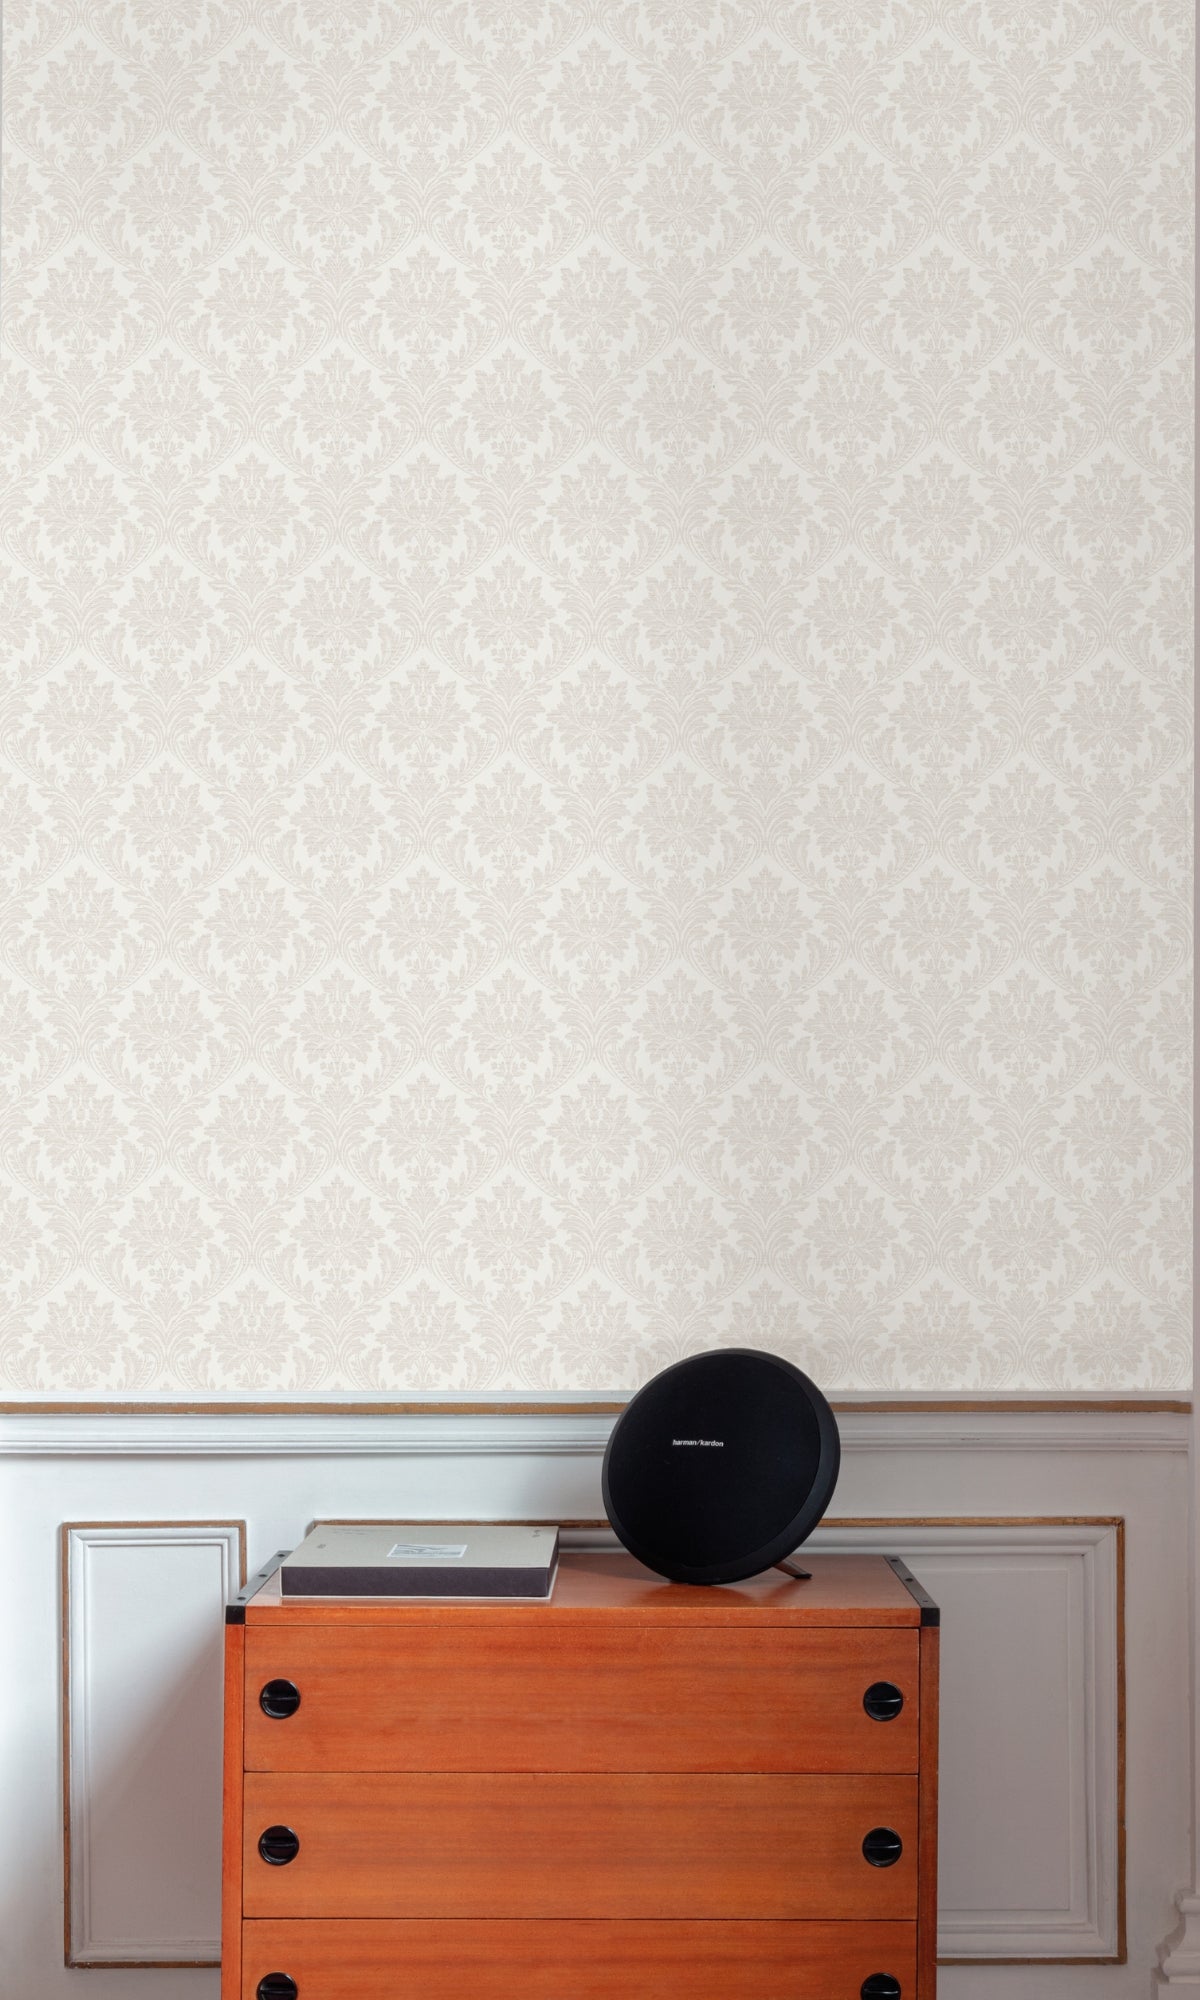 White Classic Floral Damask Wallpaper R9205